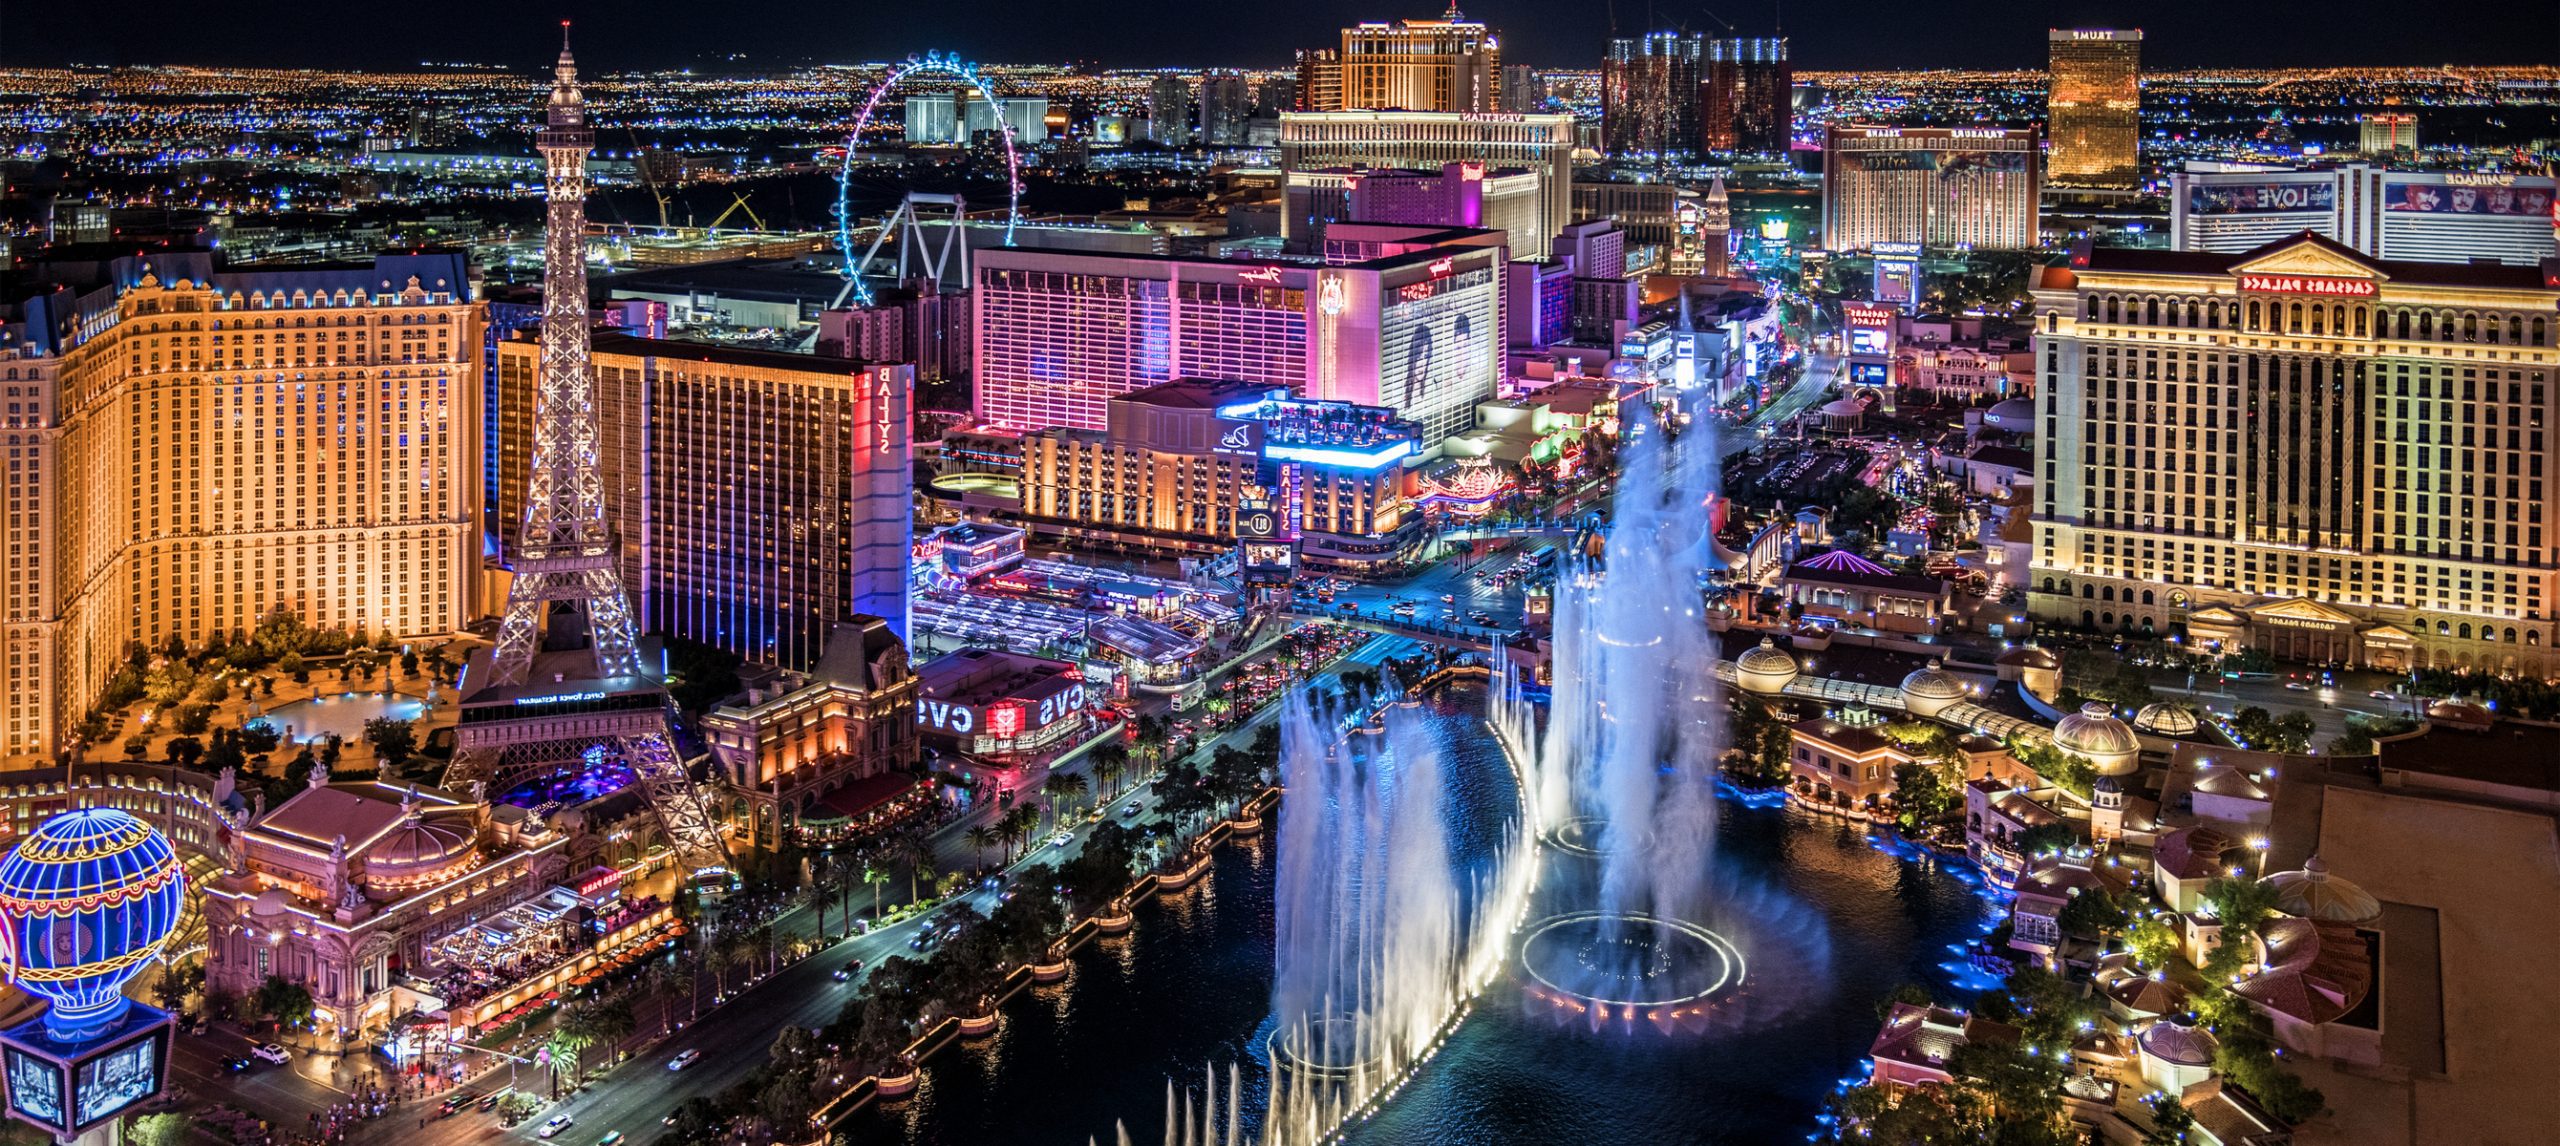 The 14 Best Things To Do in Las Vegas During The Weekend